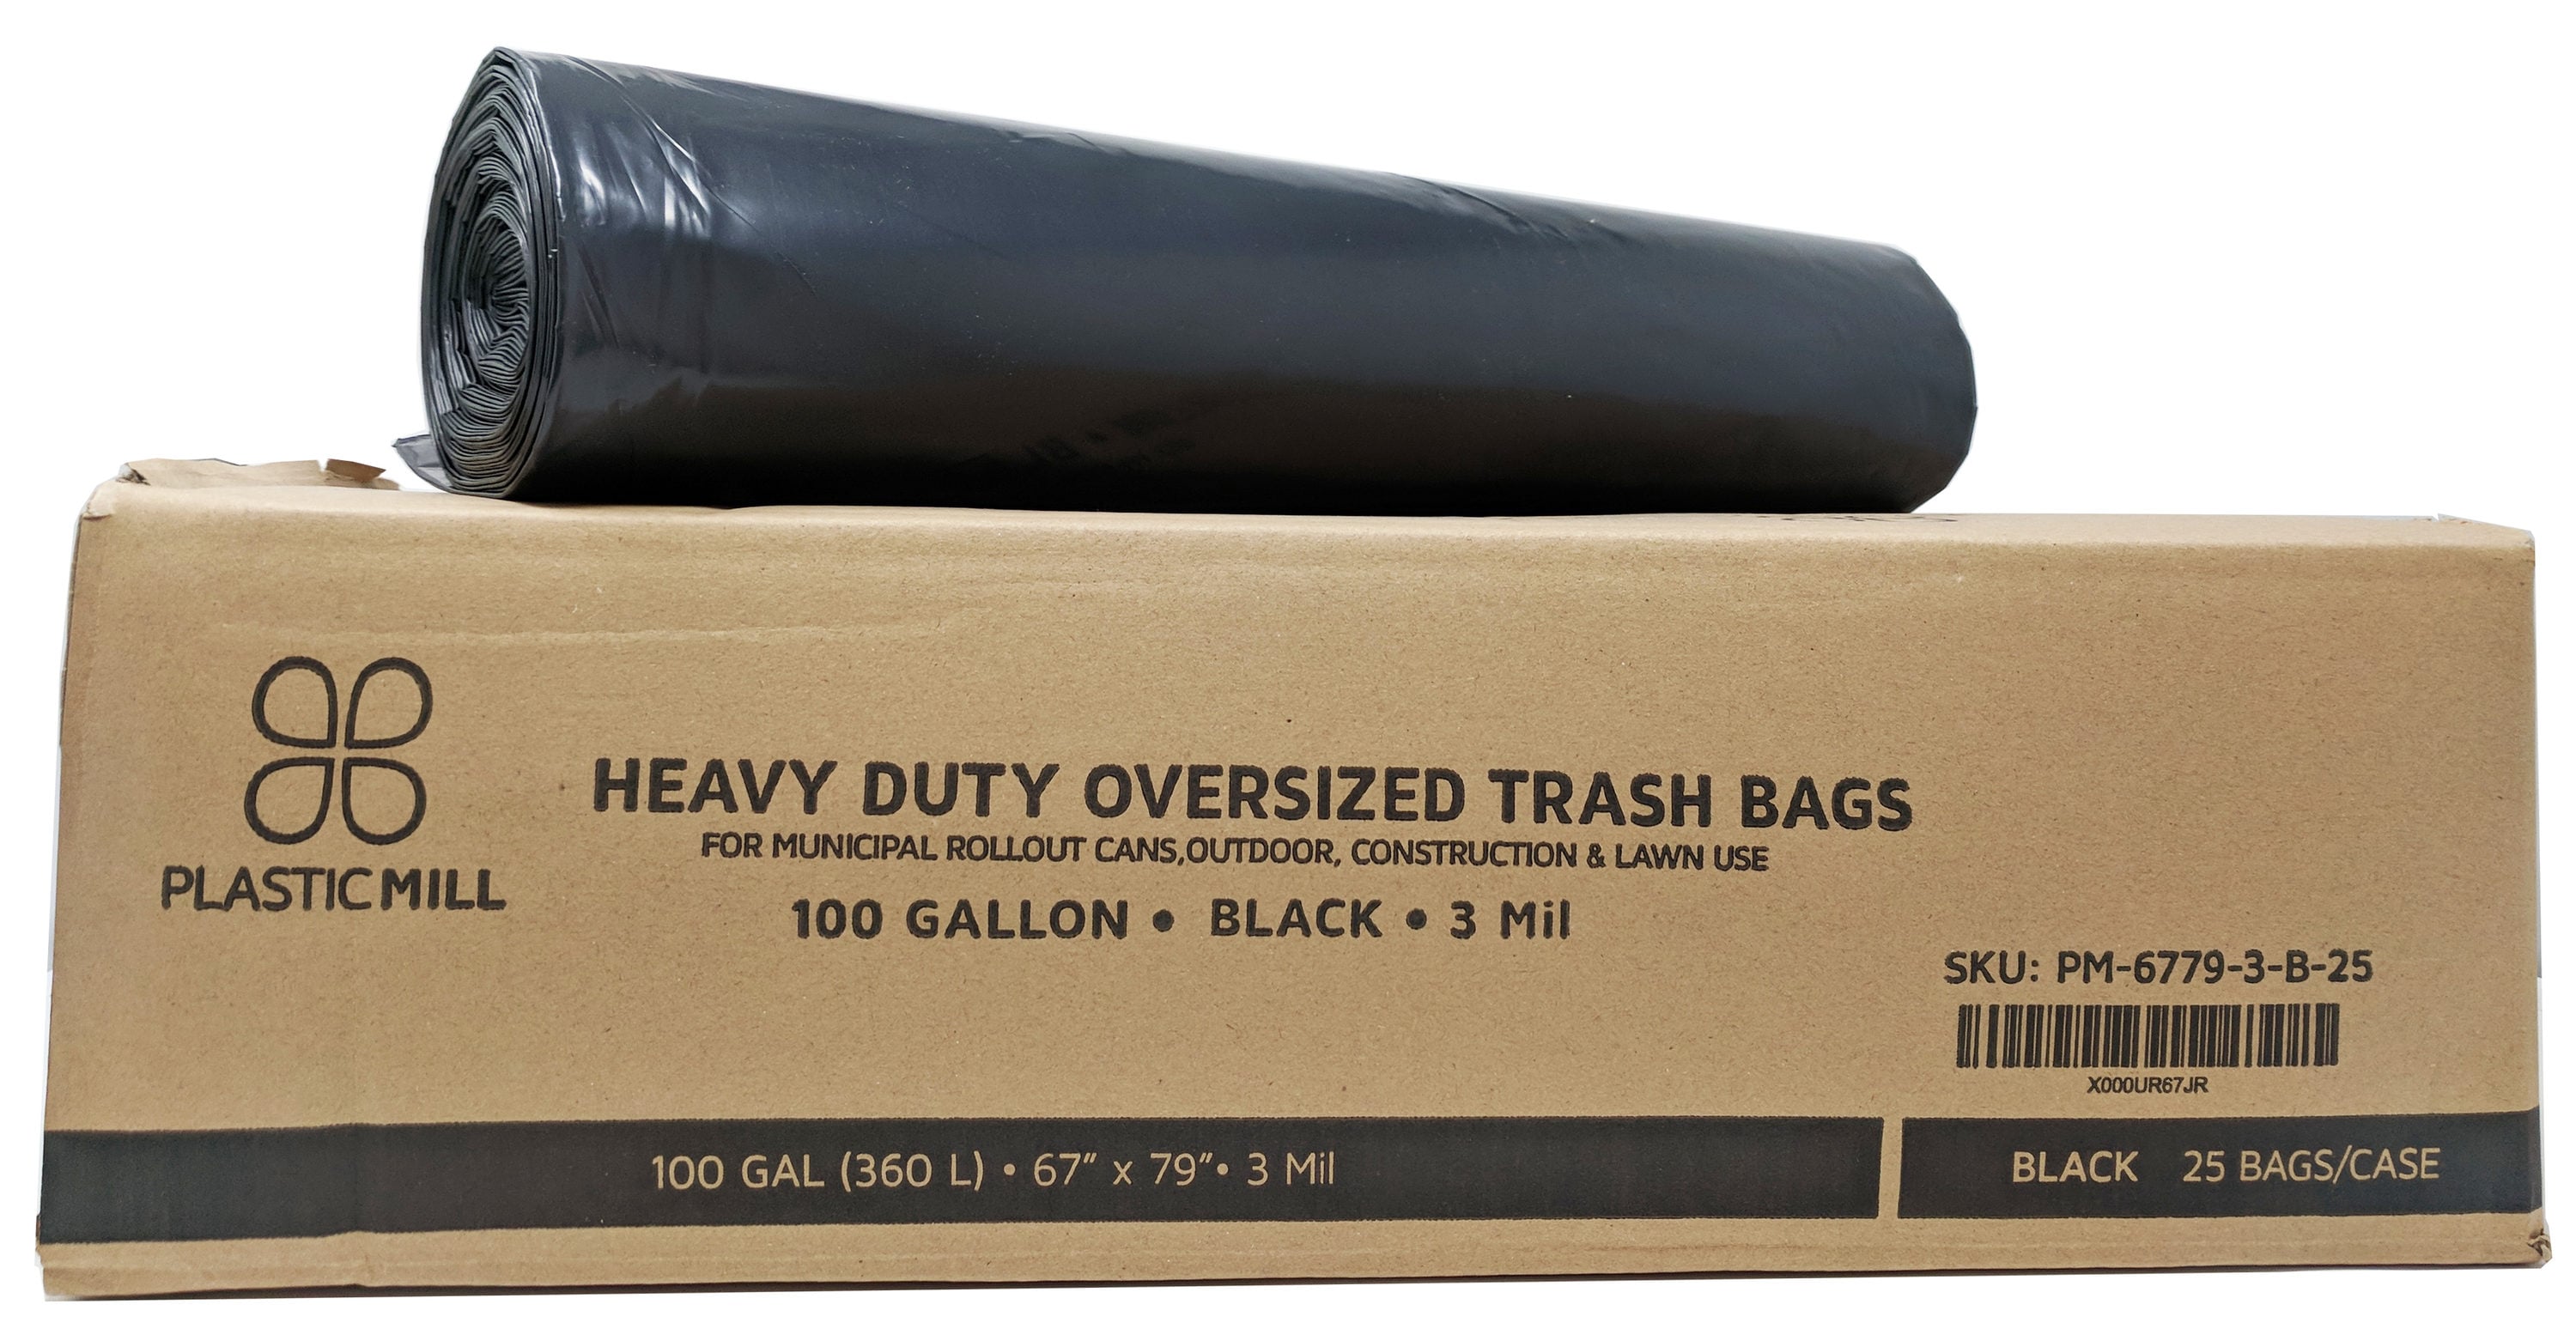 PlasticMill plasticmill 100 gallon, black, 2 mil, 67x79, 10 bags/case,  heavy duty, garbage bags/trash can liners.